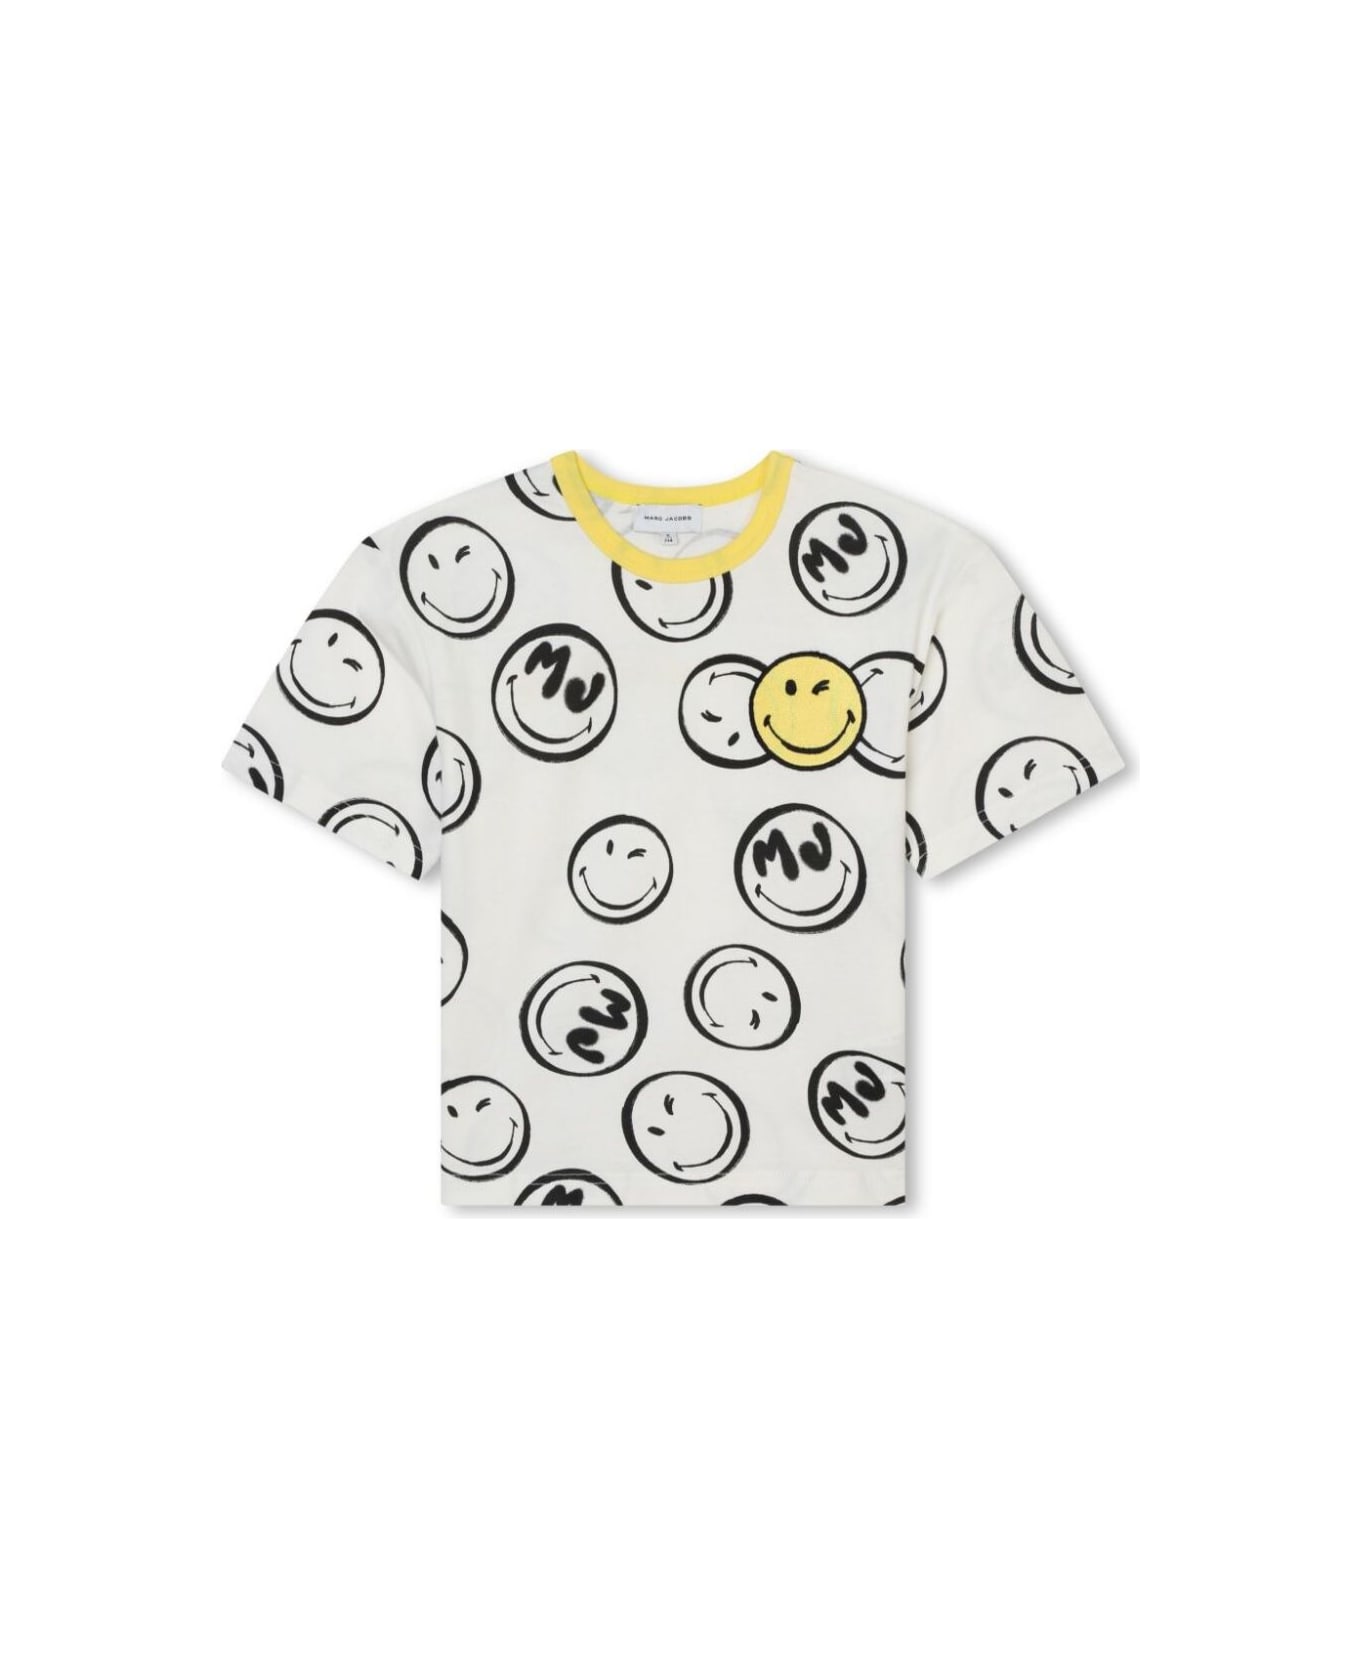 Marc Jacobs White Crewneck T-shirt With All-over Smile Print In Cotton Boy - White